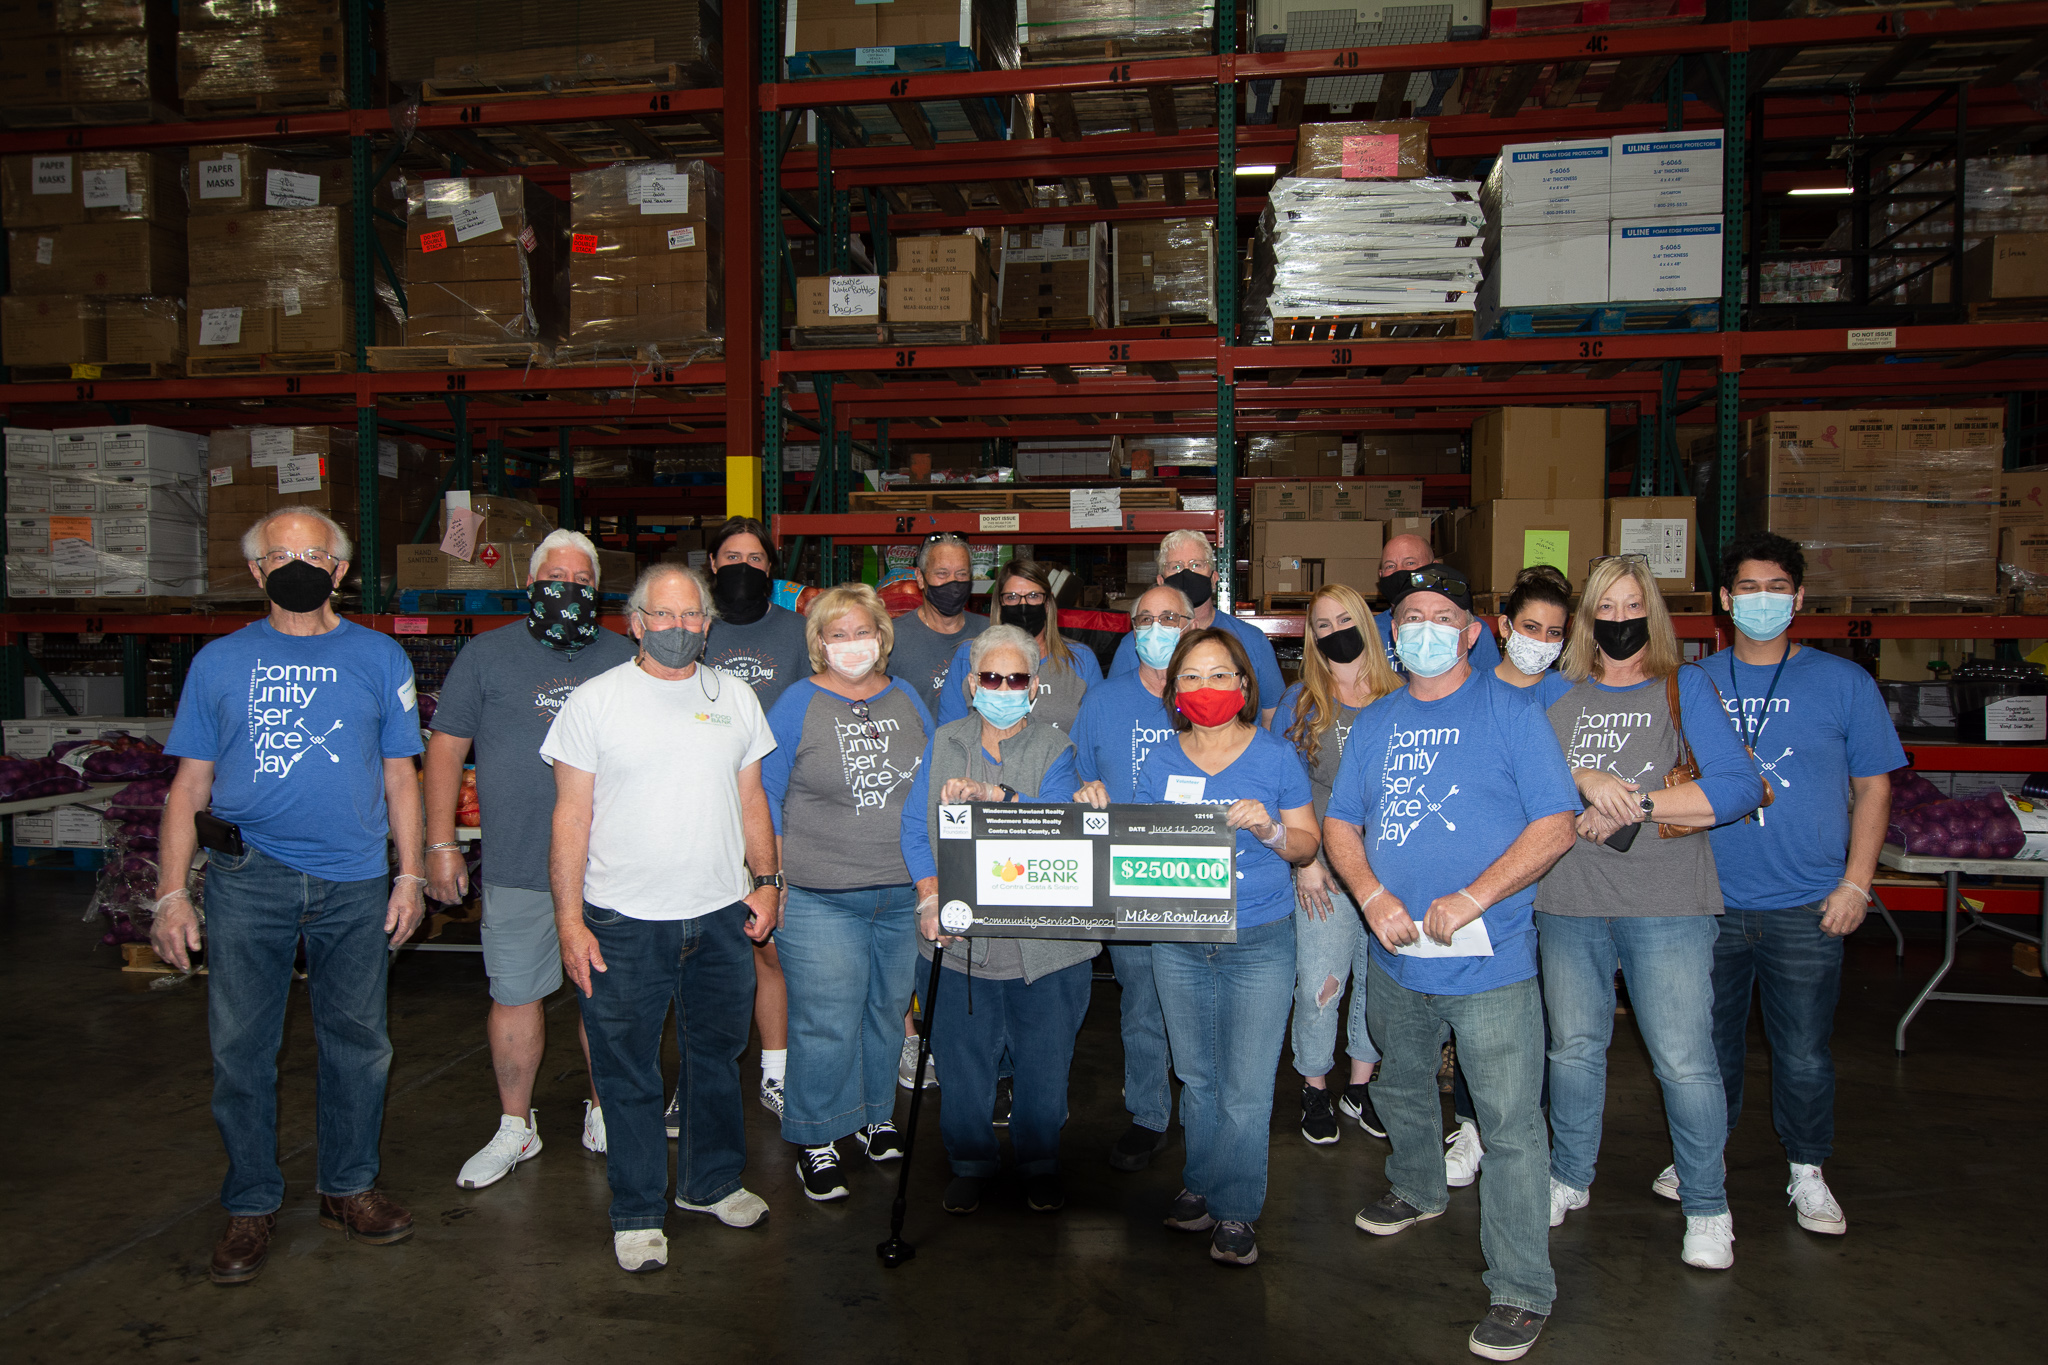 A group of people wearing sanitary masks stand together in a food bank warehouse holding a donation check.